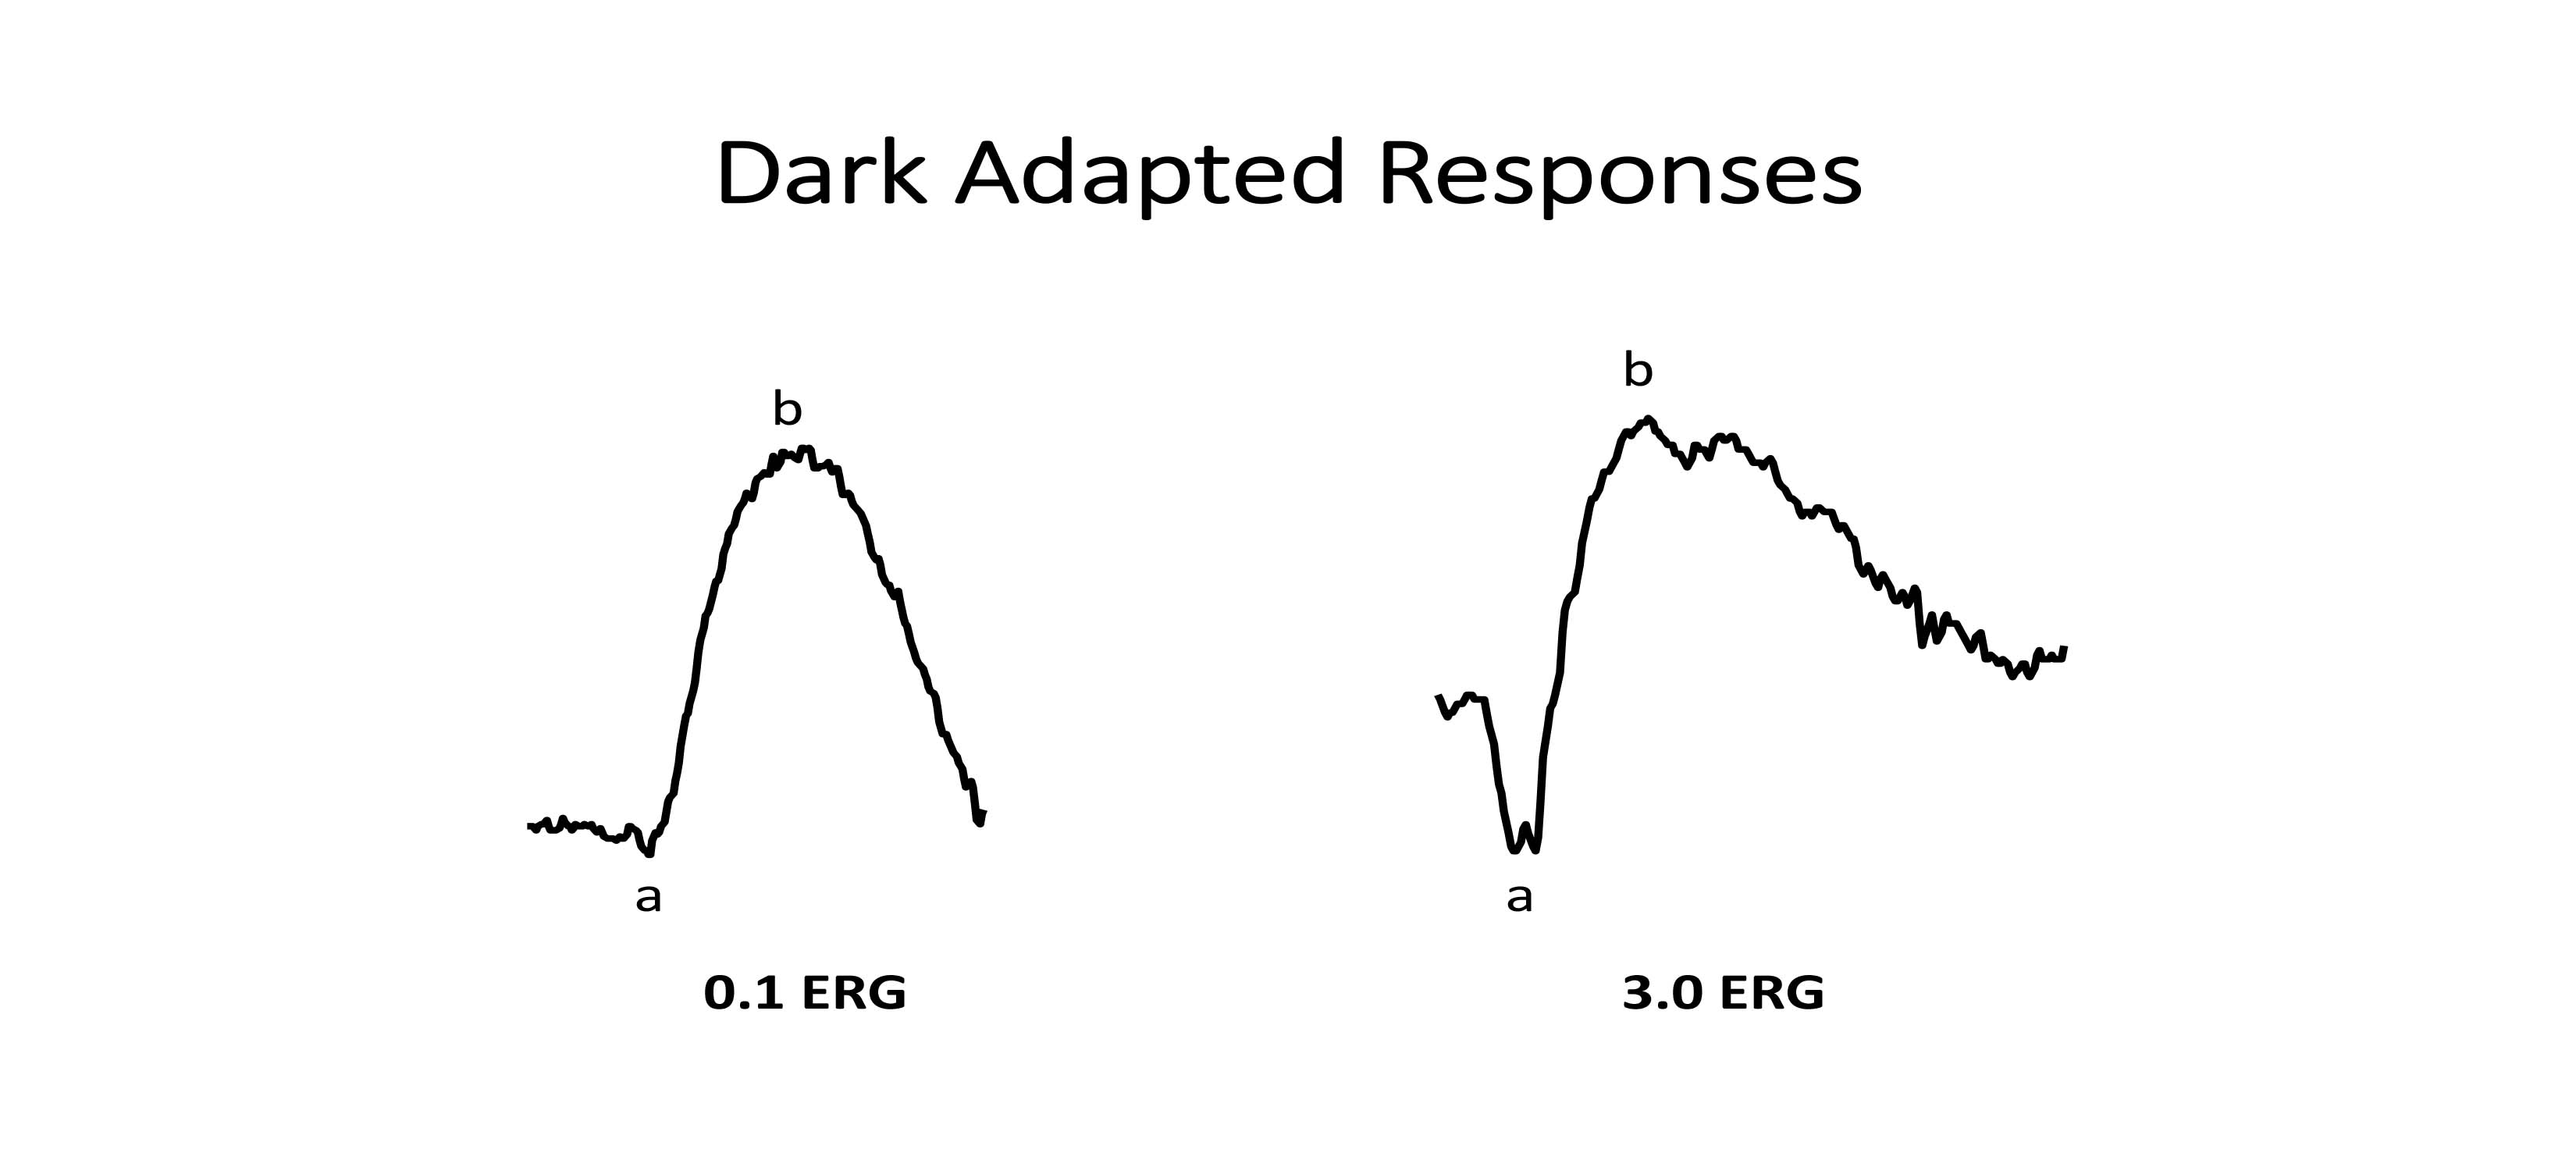 Illustration of a normal the dark adapted ffERG for a low intensity rod response (0